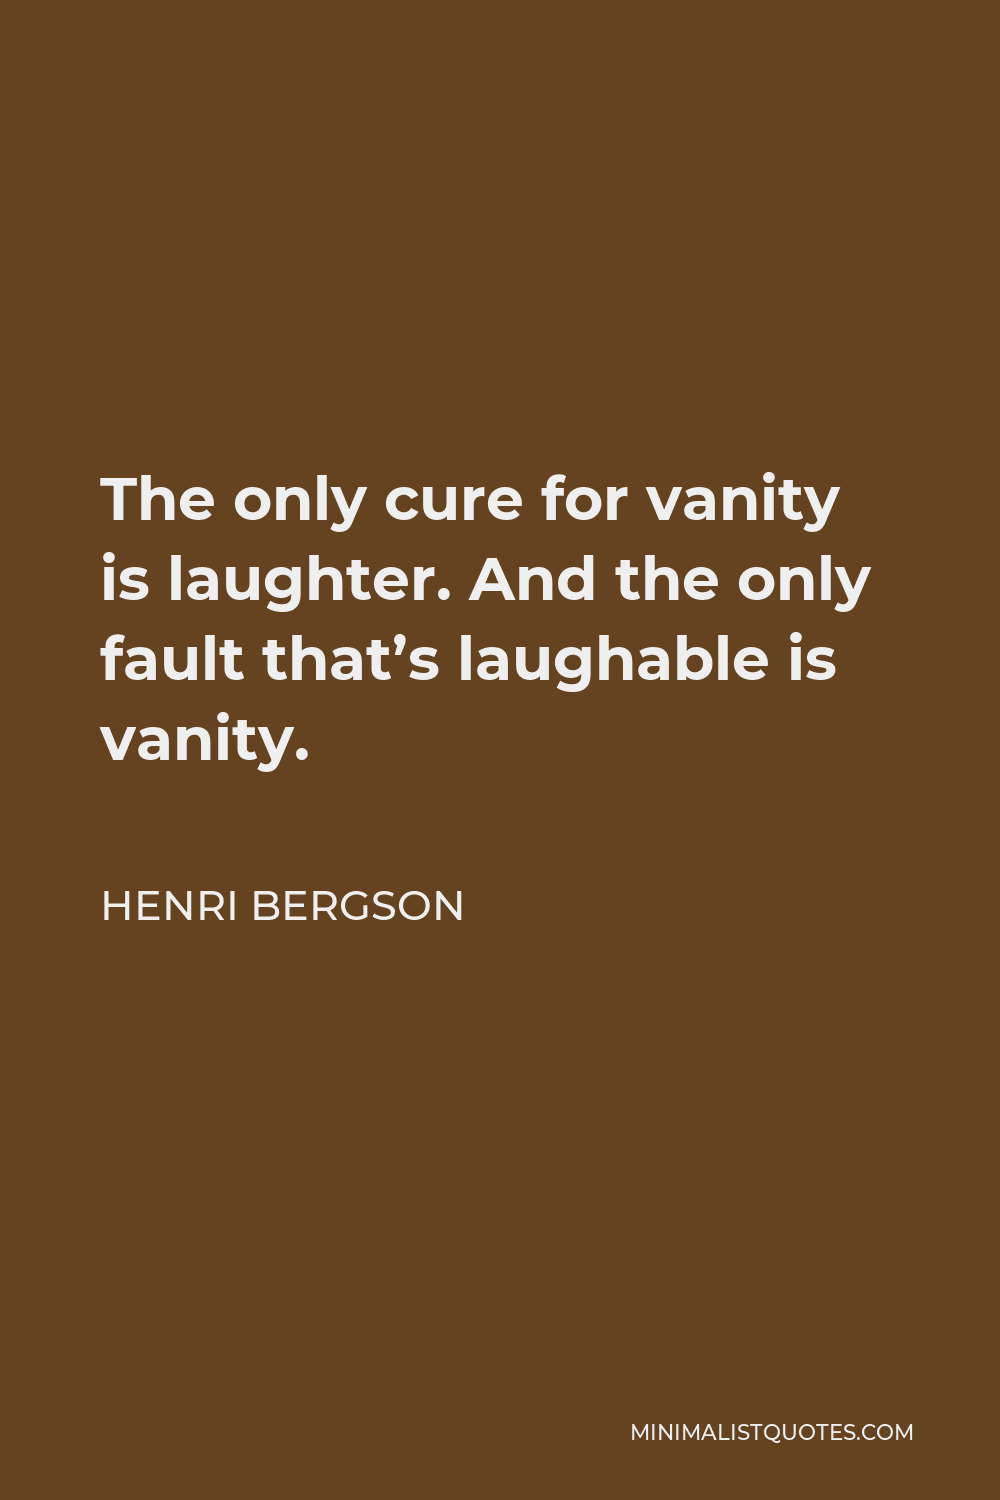 Henri Bergson Quote - The only cure for vanity is laughter. And the only fault that’s laughable is vanity.